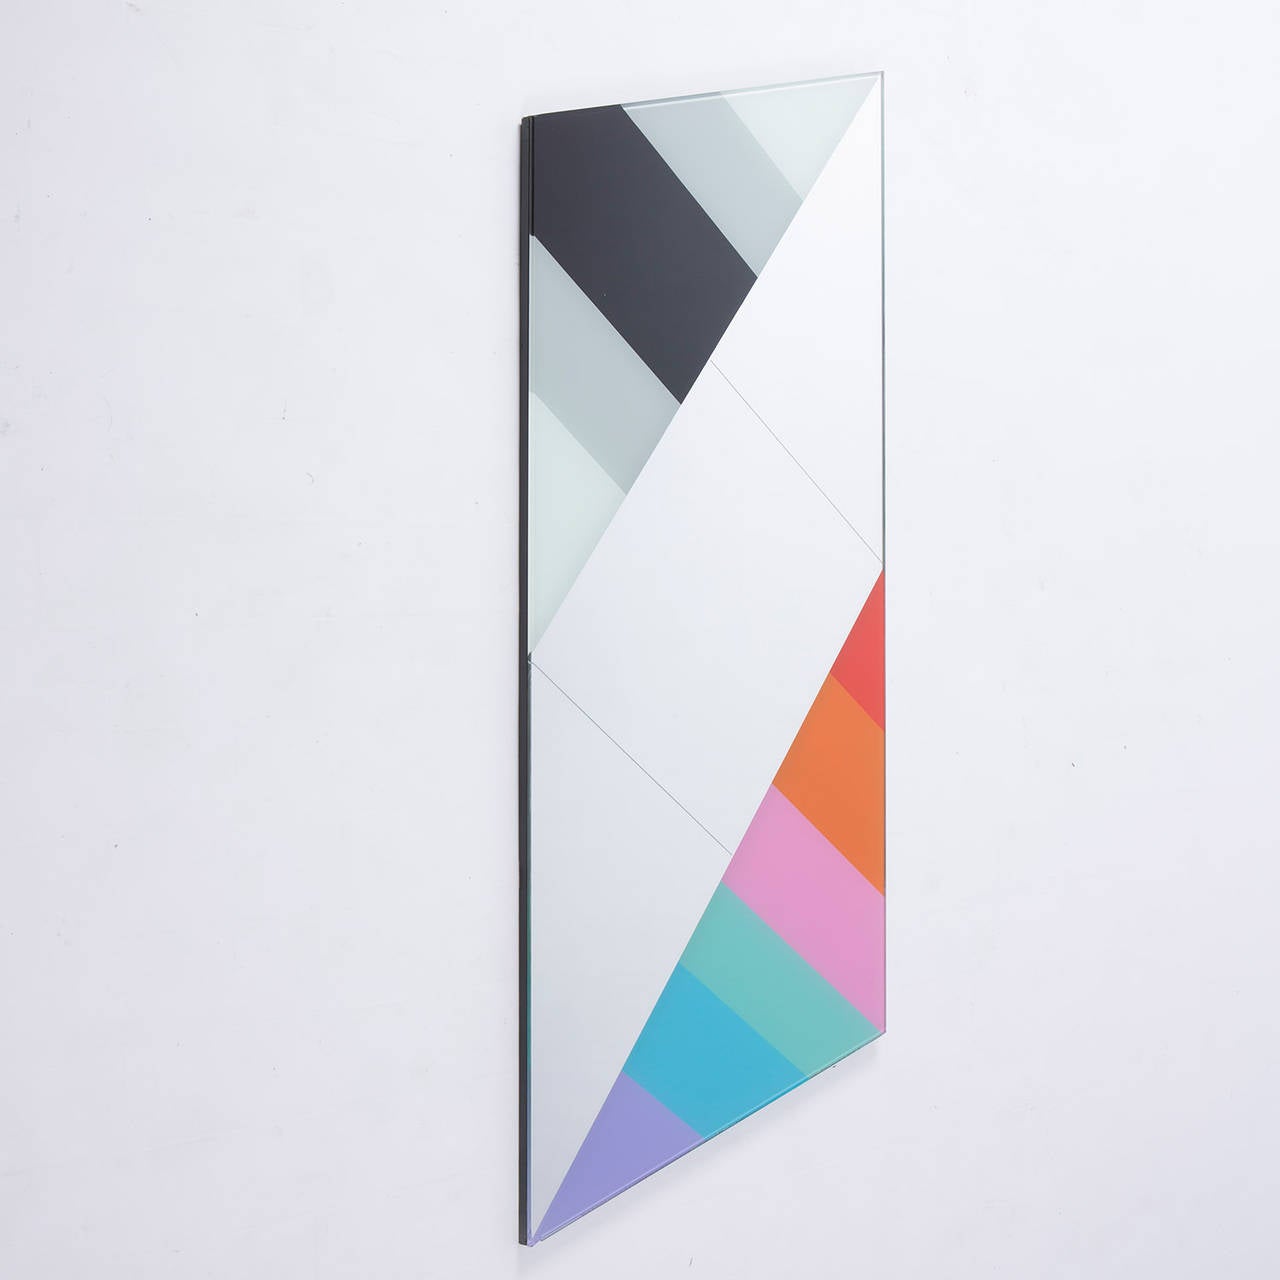 Wall mirror by Eugenio Carmi for Morphos collection, Acerbis international.